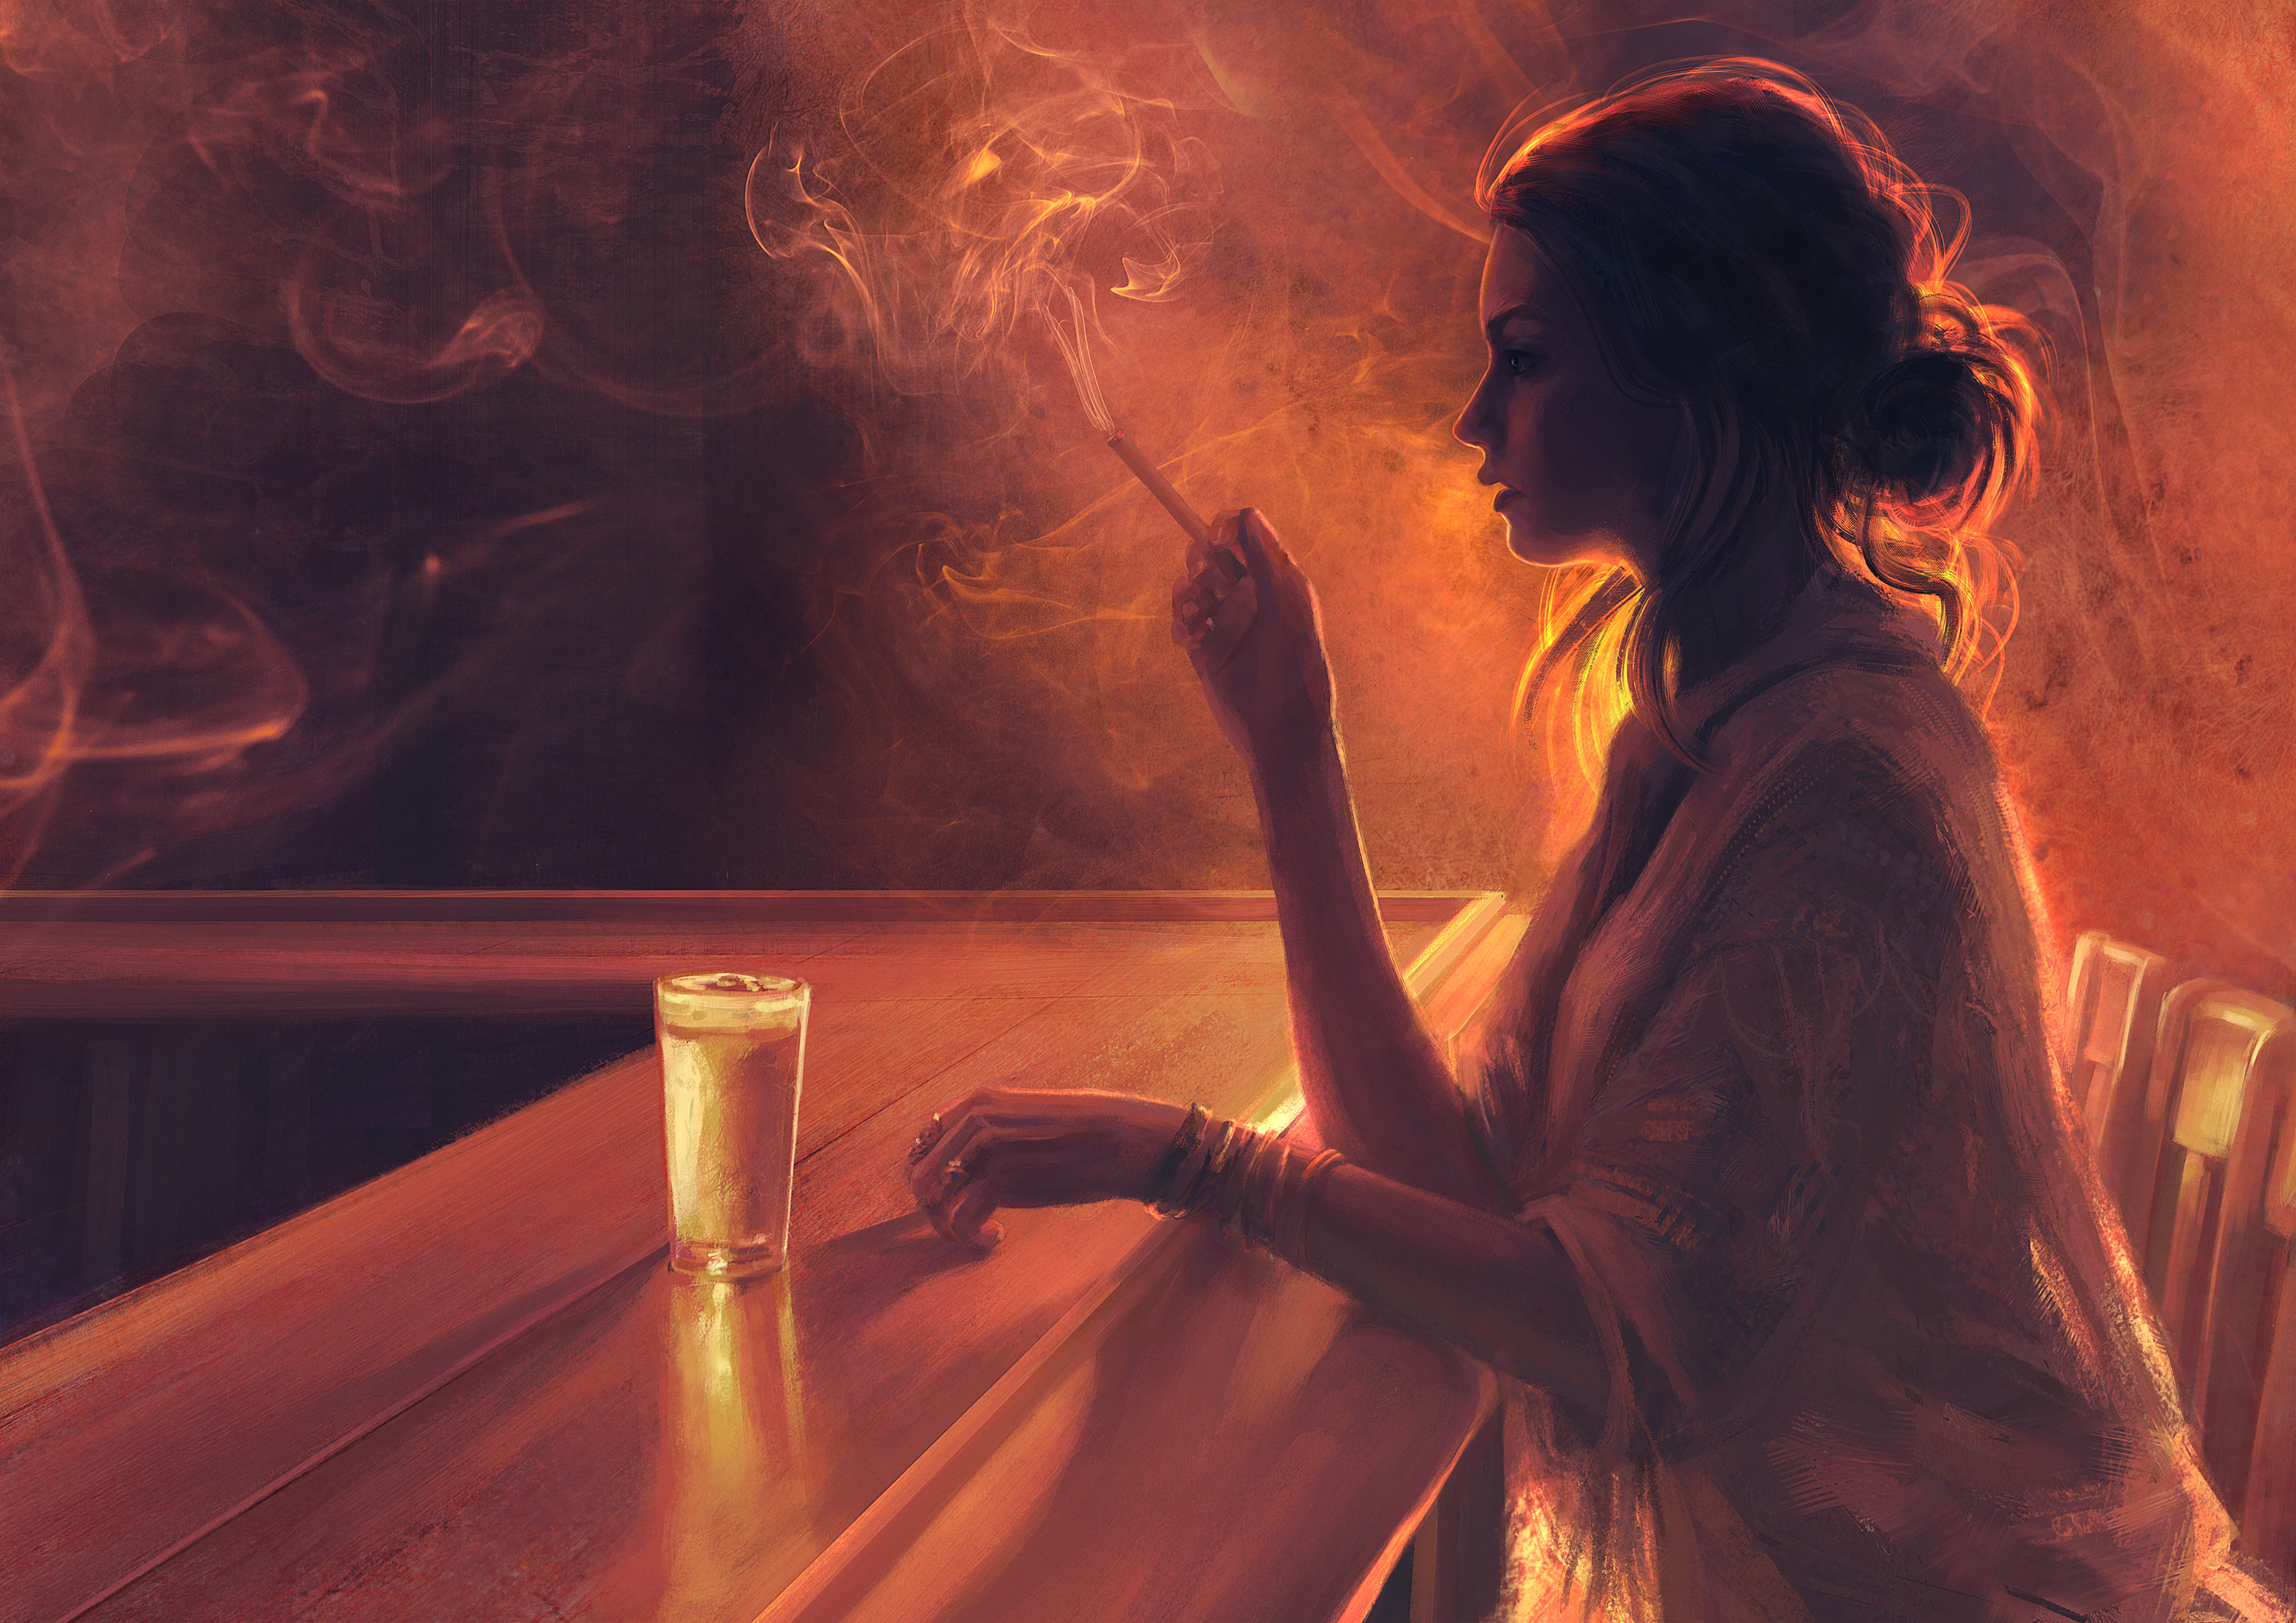 alone, painting, bar, artistic, smoking High Definition image